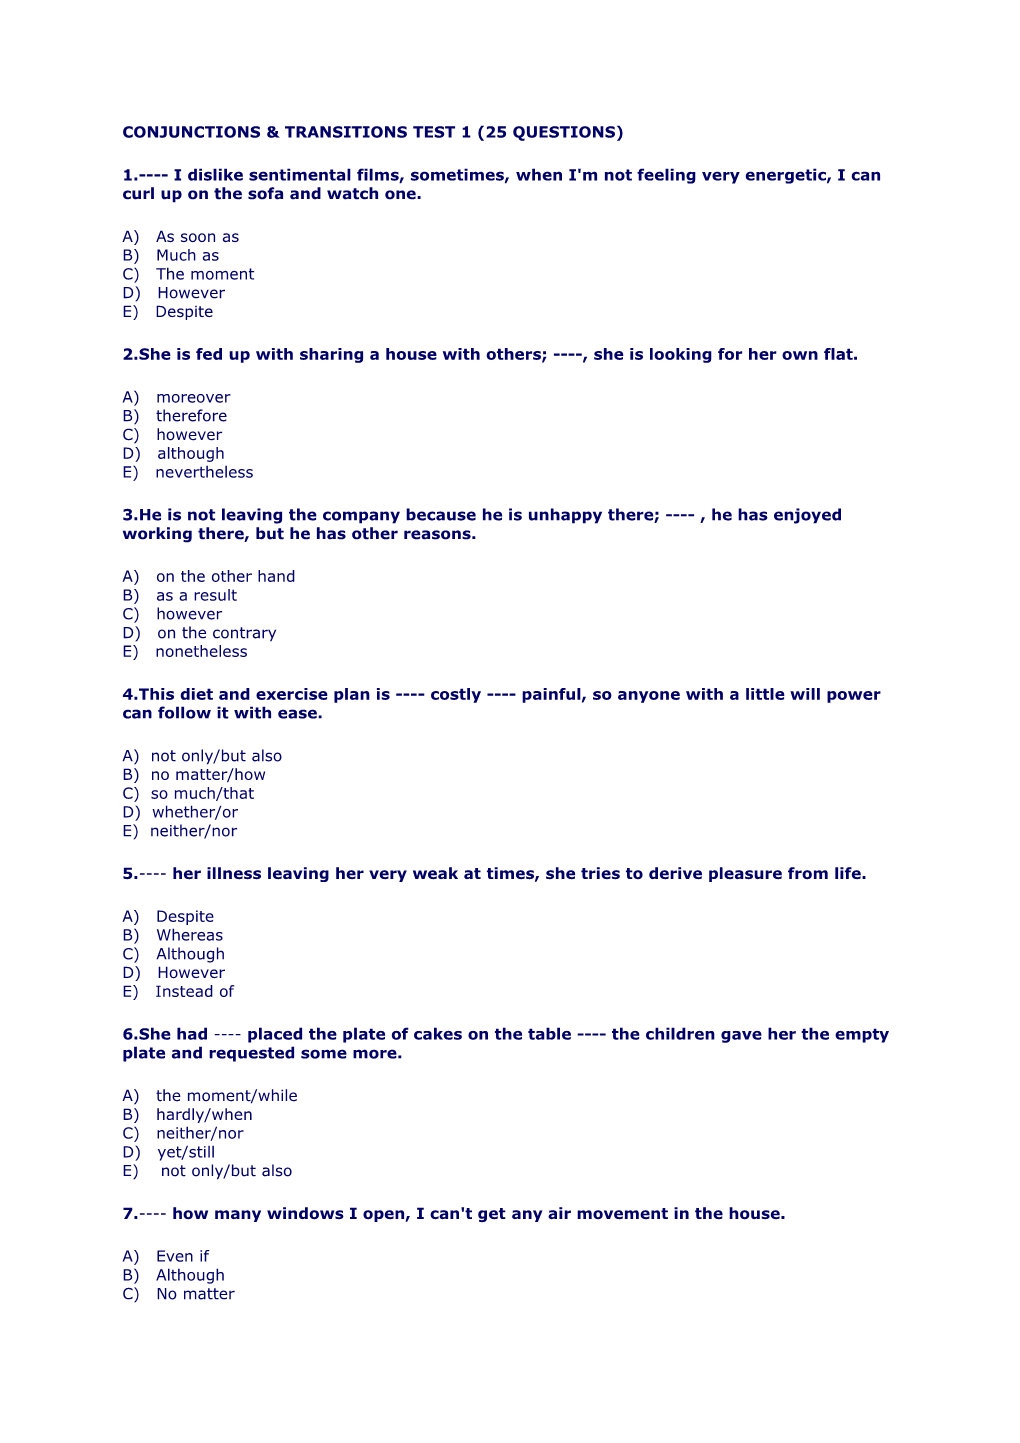 Conjunctions & Transitions Test 1 (25 Questions)